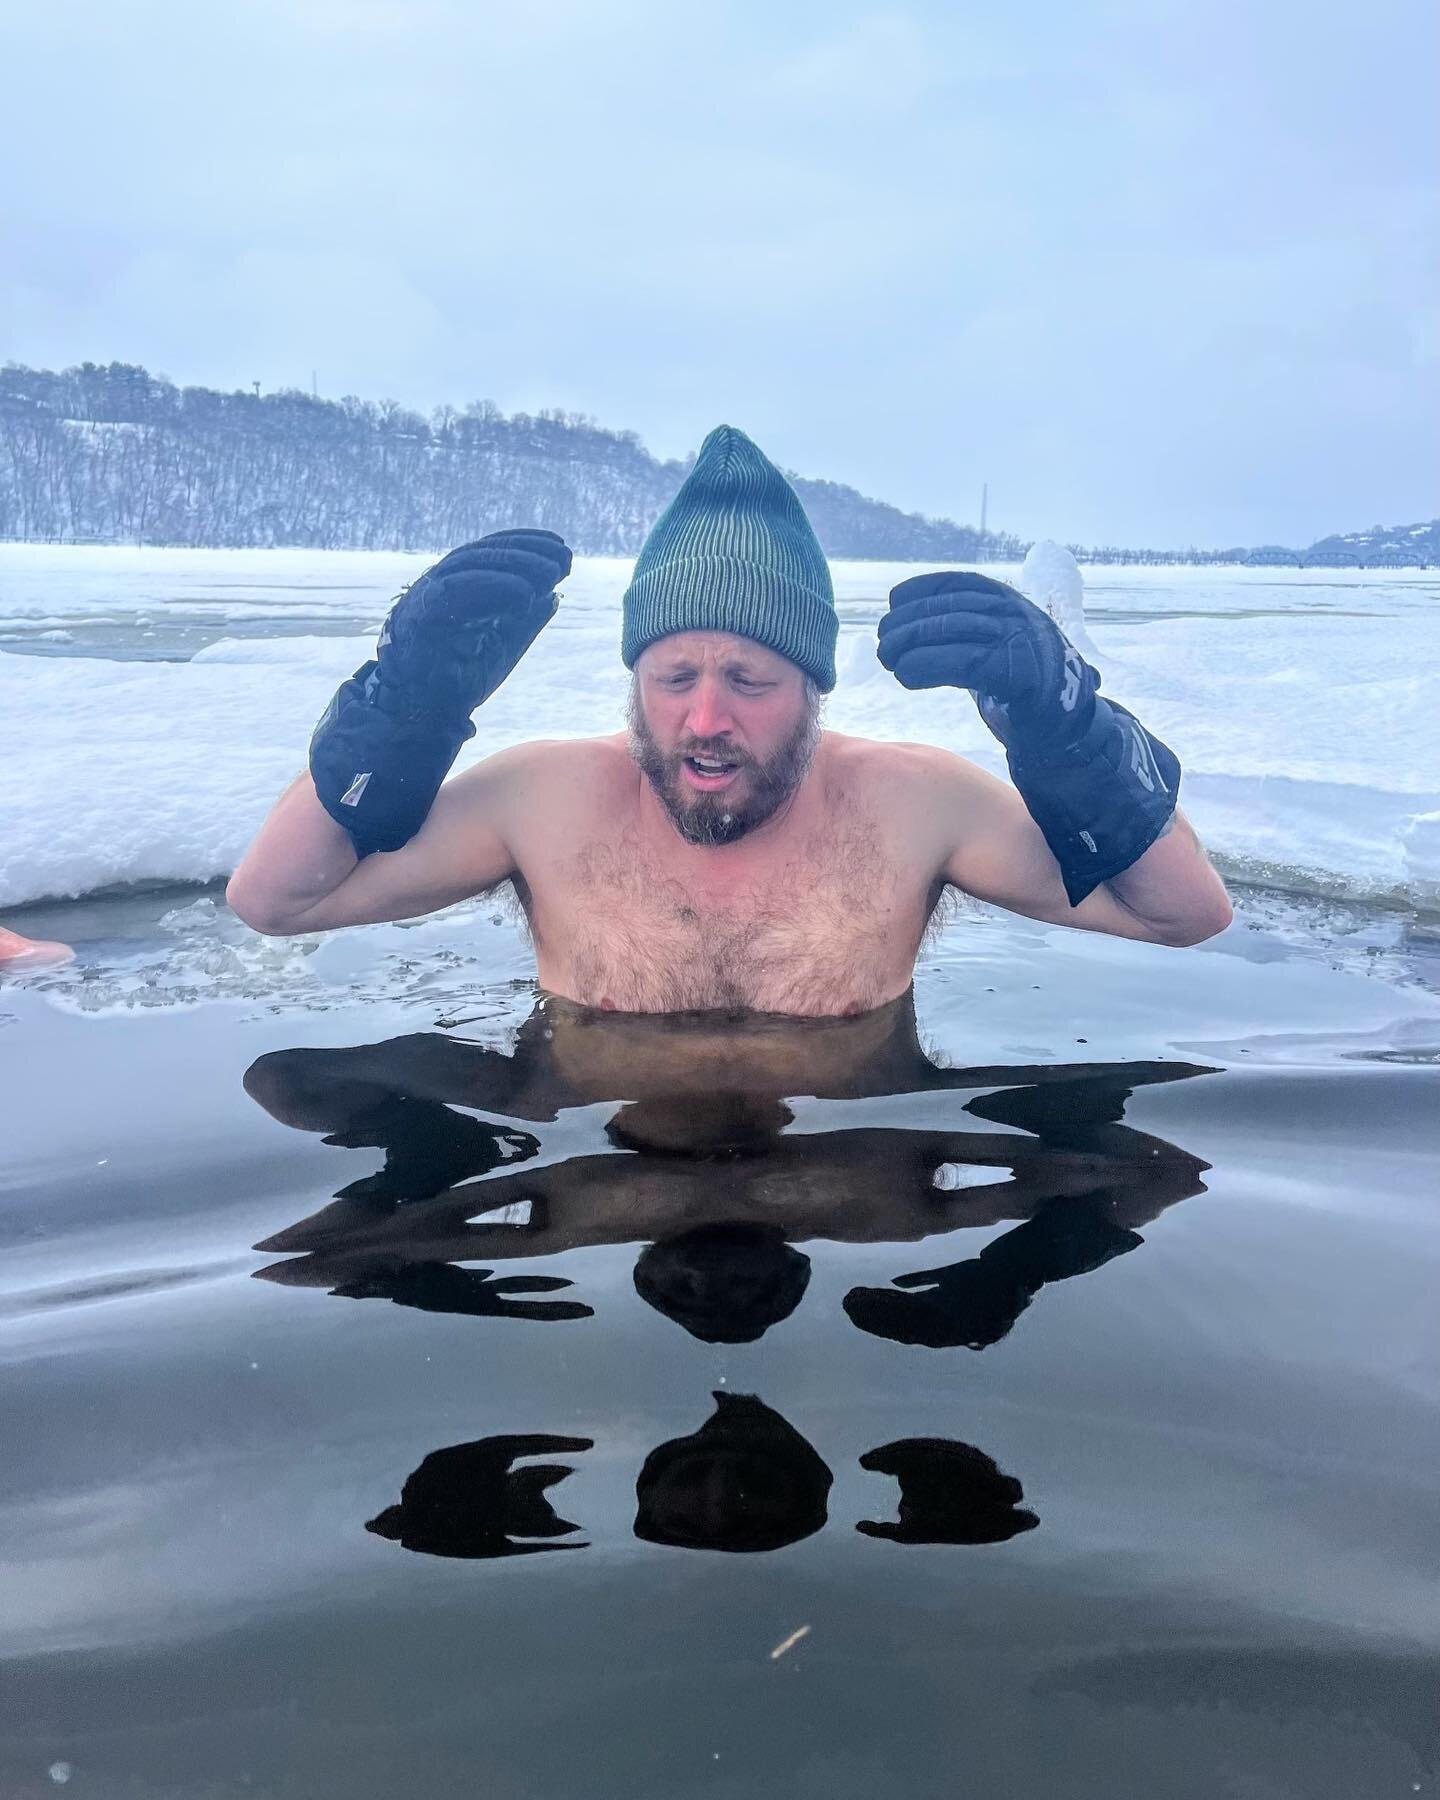 I was invited to dip my toes in the St. Croix. Although it was four months earlier than I would typically consider the idea, and despite the facial expression captured above, I&rsquo;m glad I did it. 

#coldplunge #saintcroixvalley #stcroixriver #col